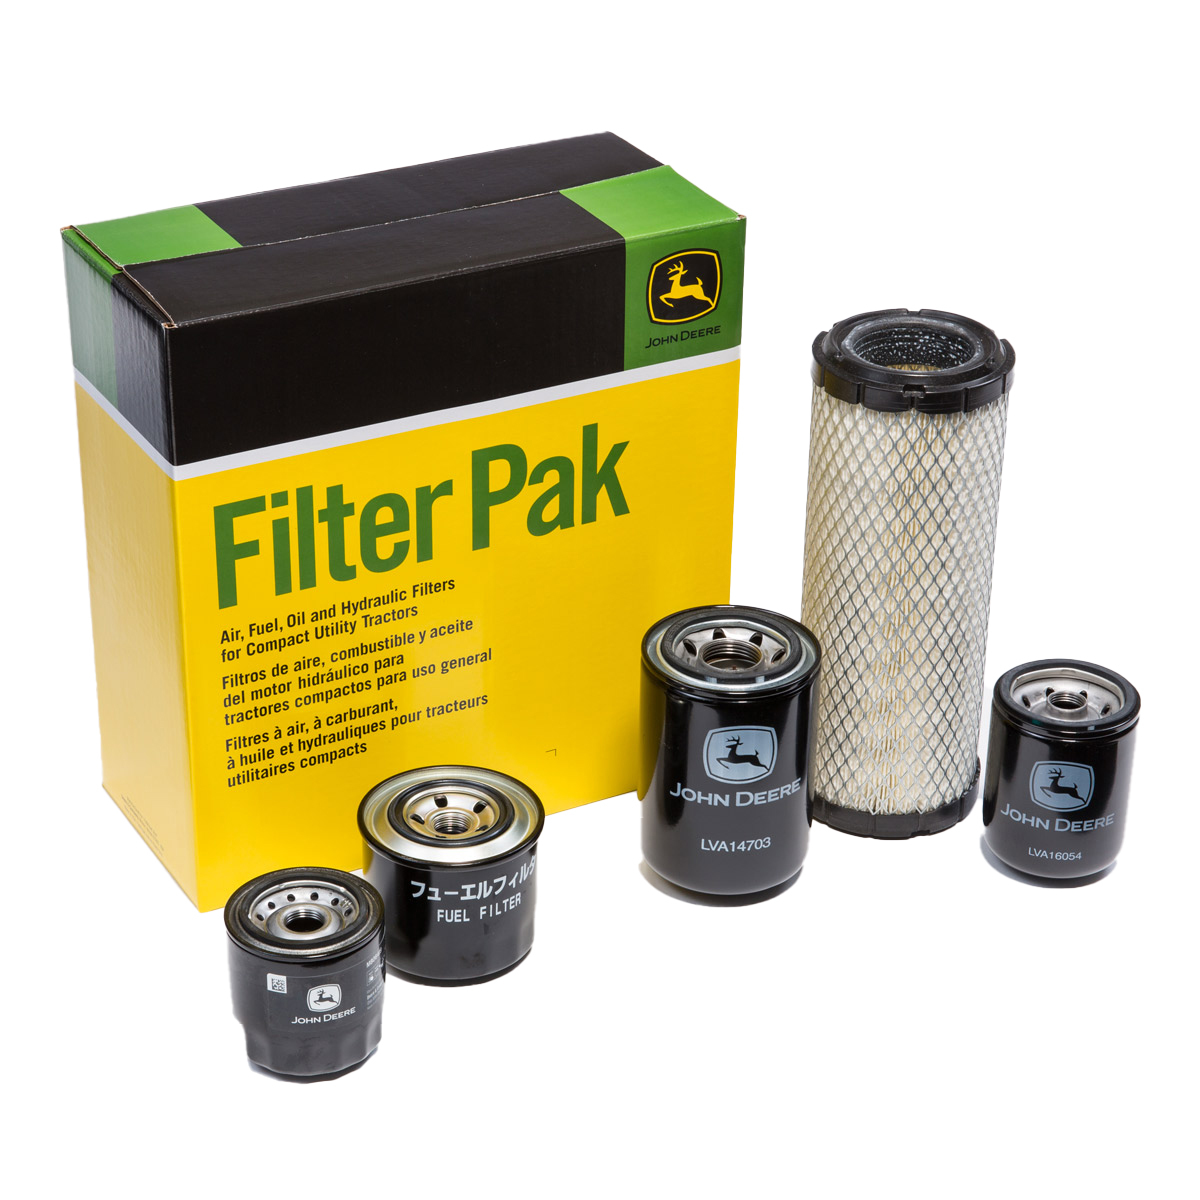 NEW INLINE FUEL FILTERS FITS JOHN DEERE AND MANY BRANDS FREE SHIPPING 3 PACK 